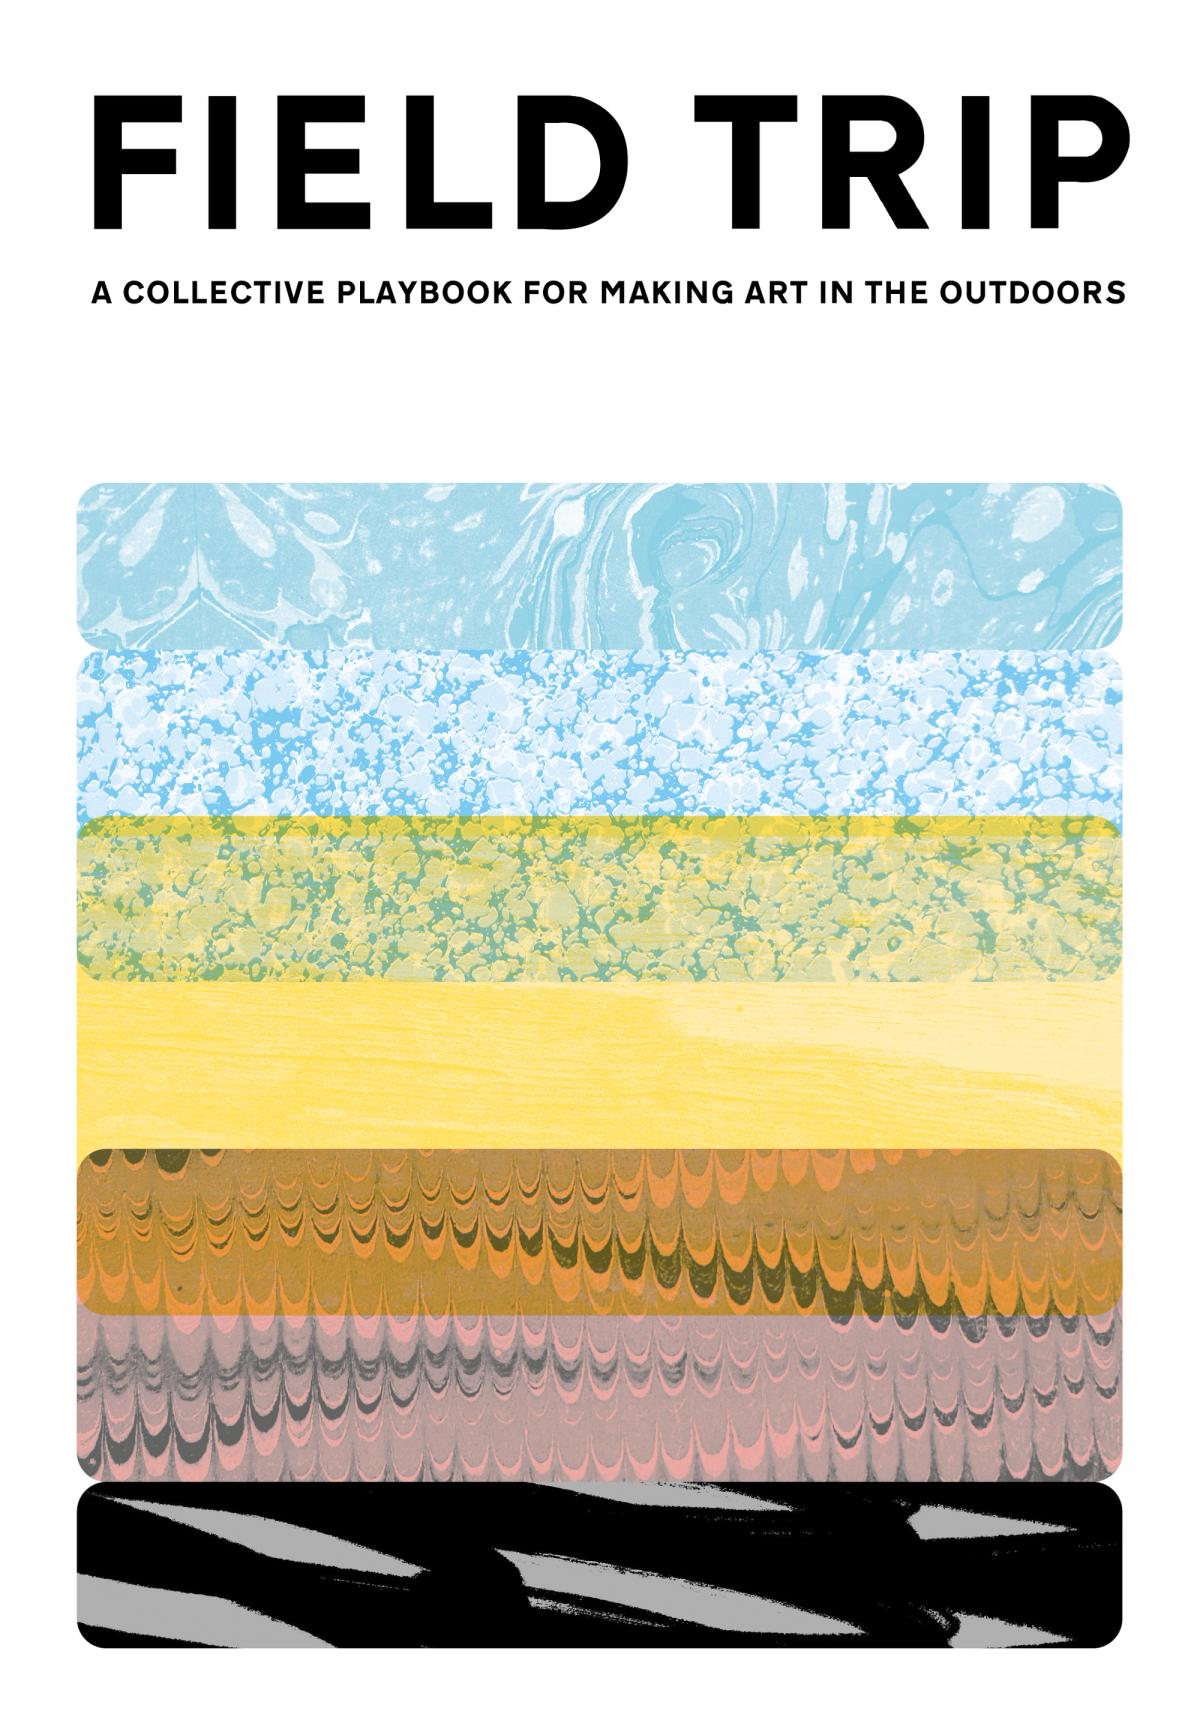 FIELD TRIP: A collective playbook for making art in the outdoors